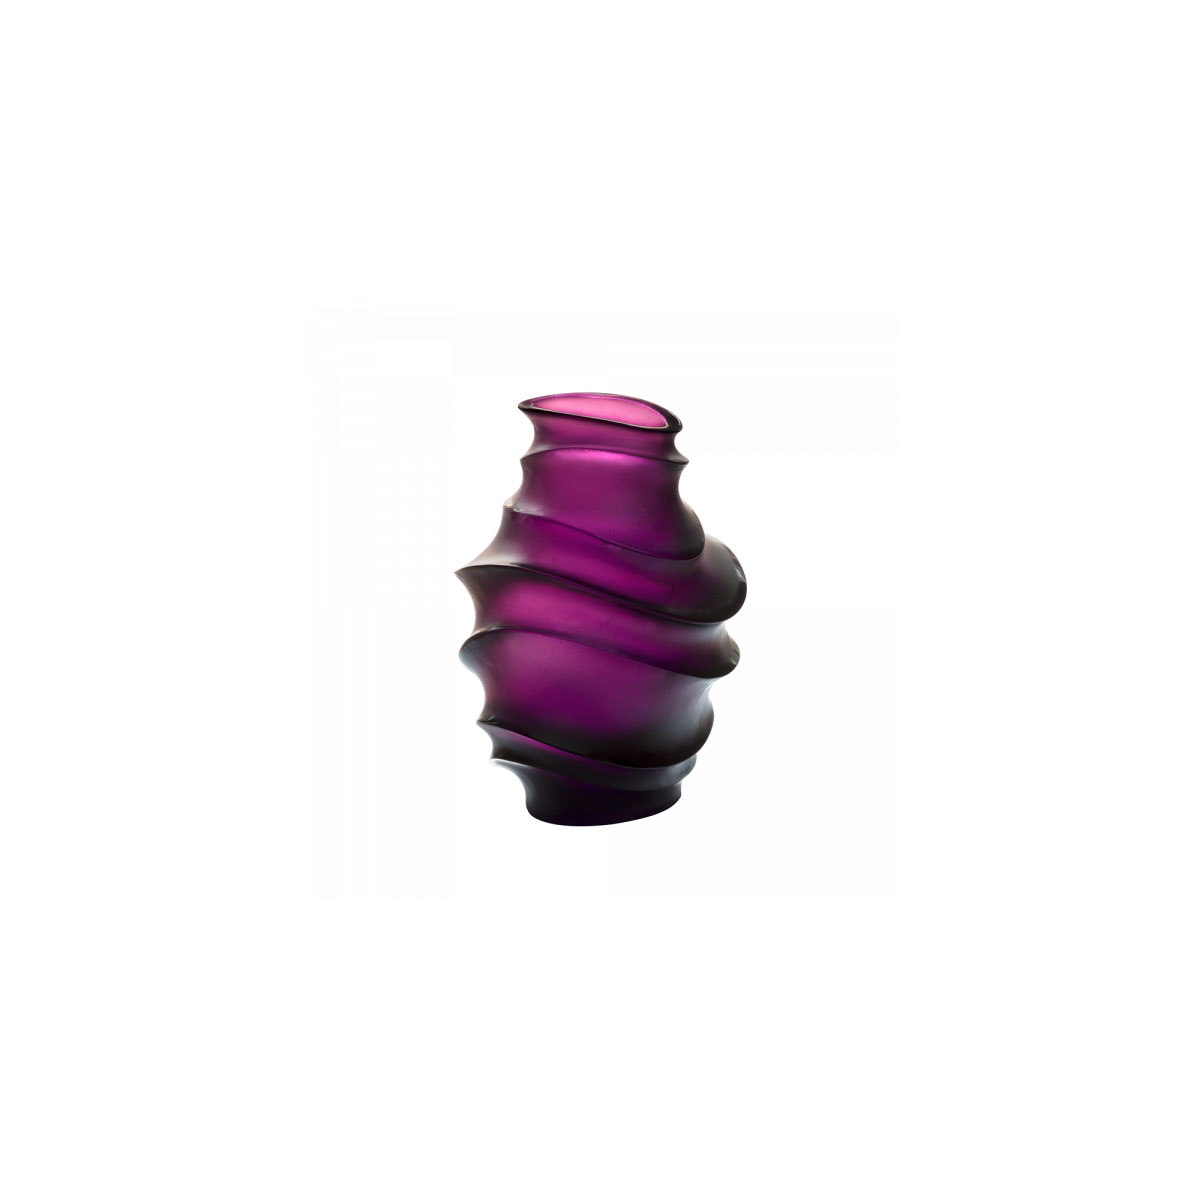 Daum 11.8" Sand Vase in Violet by Christian Ghion, Limited Edition